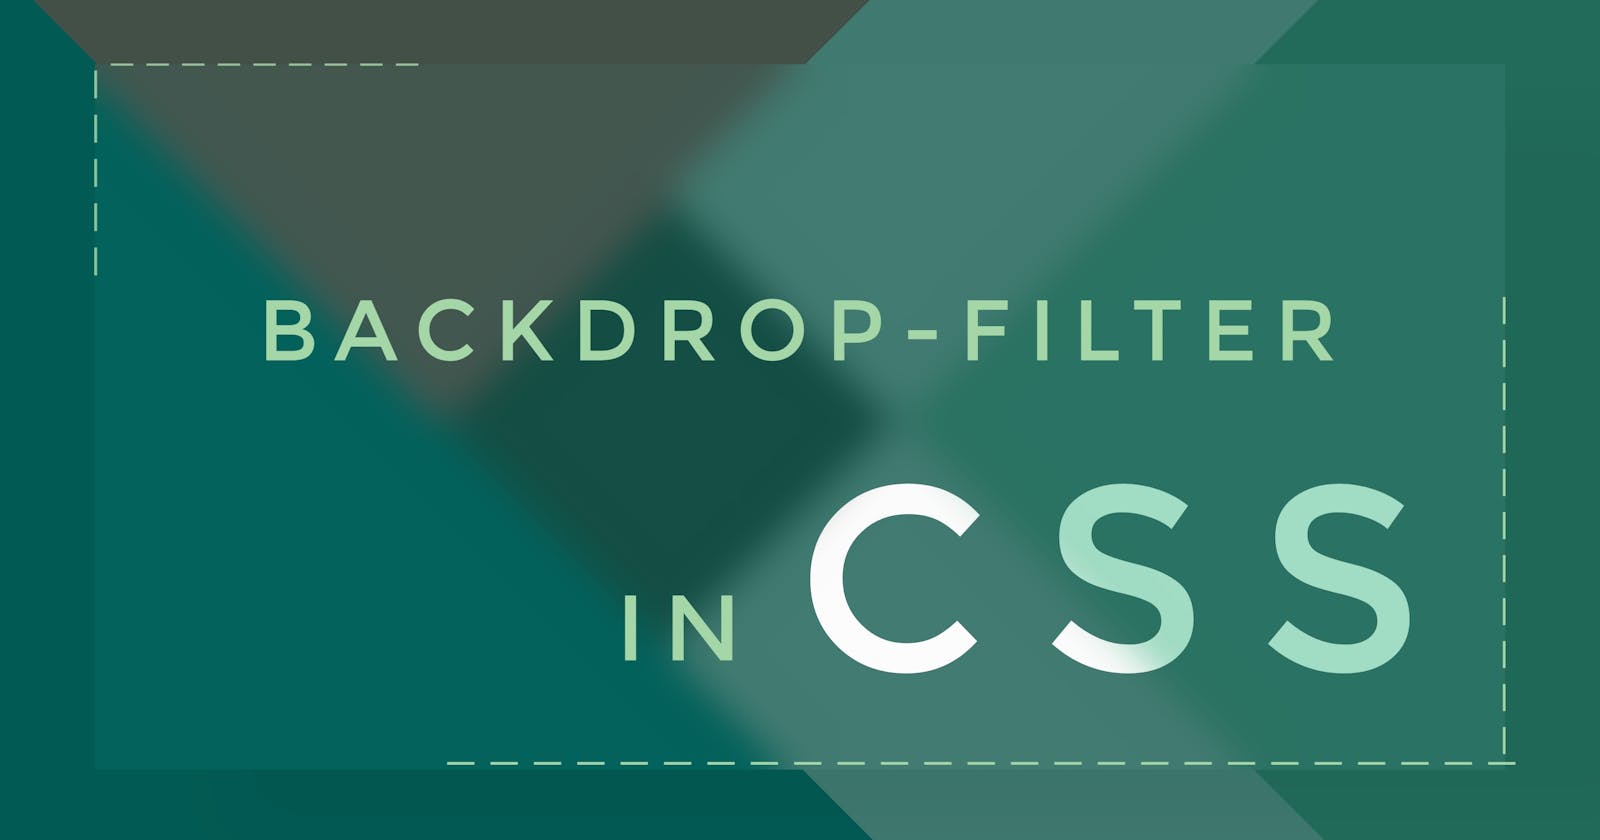 backdrop-filter in CSS